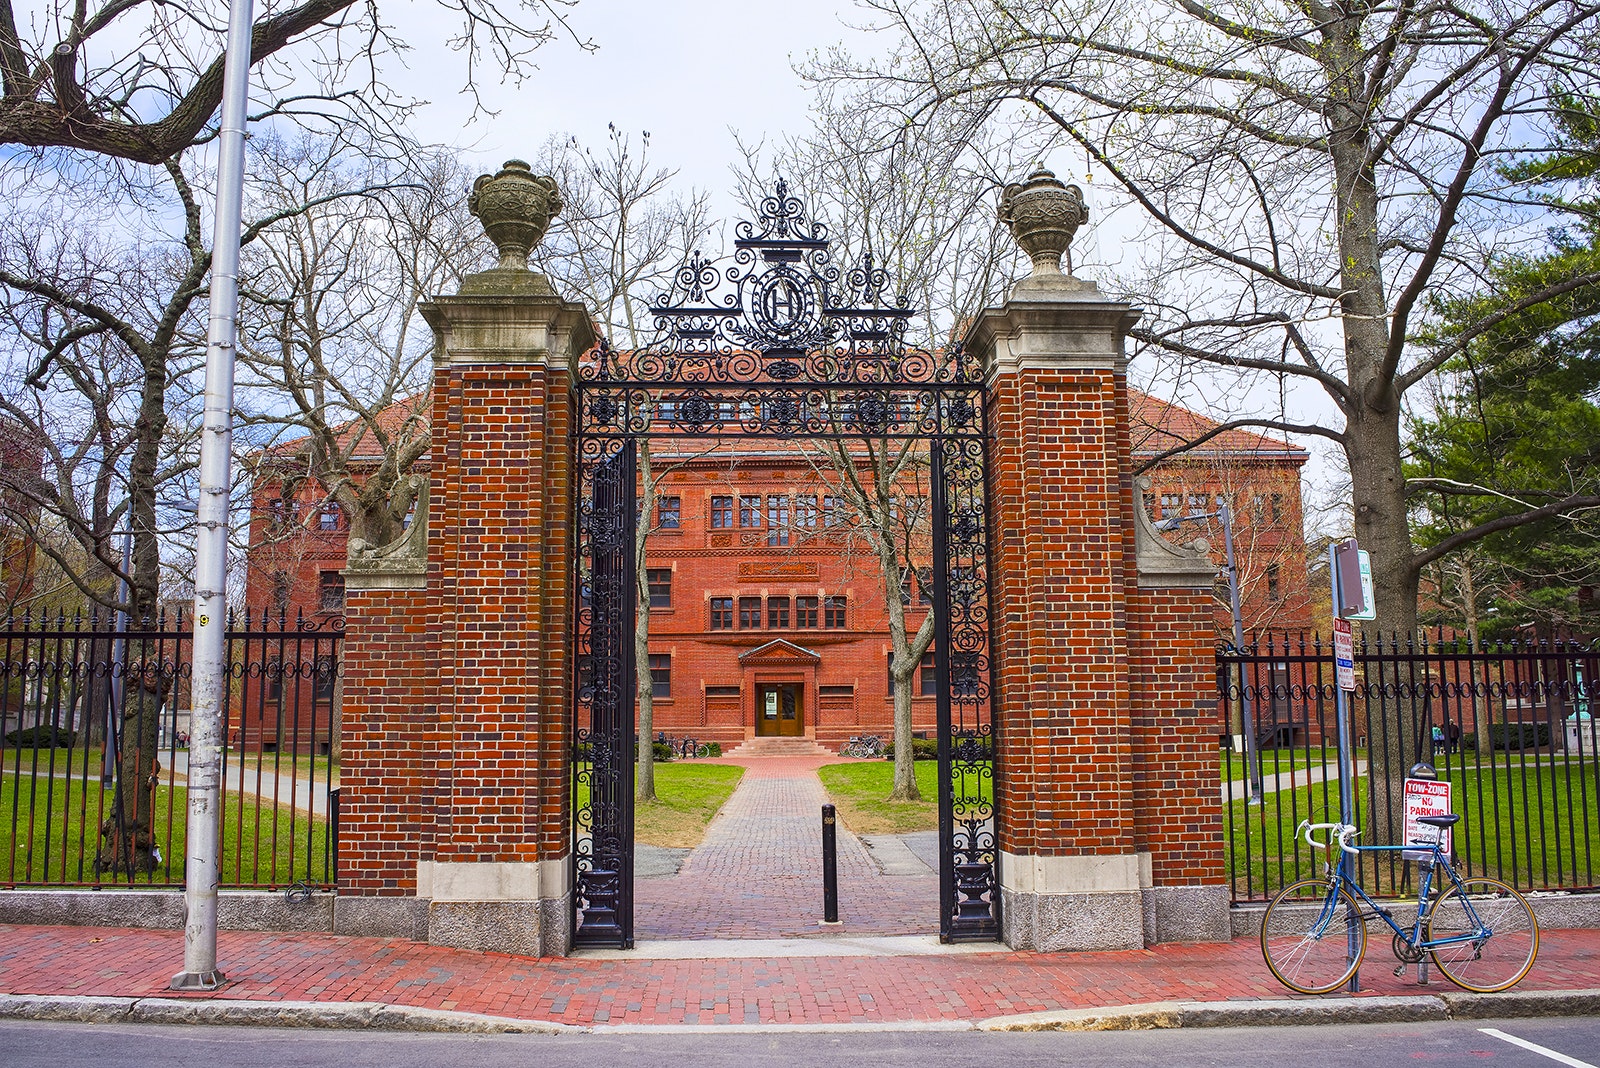 red brick gateposts and wrought iron, open gate leading to a redbrick residence hall at Harvard on a sunny day